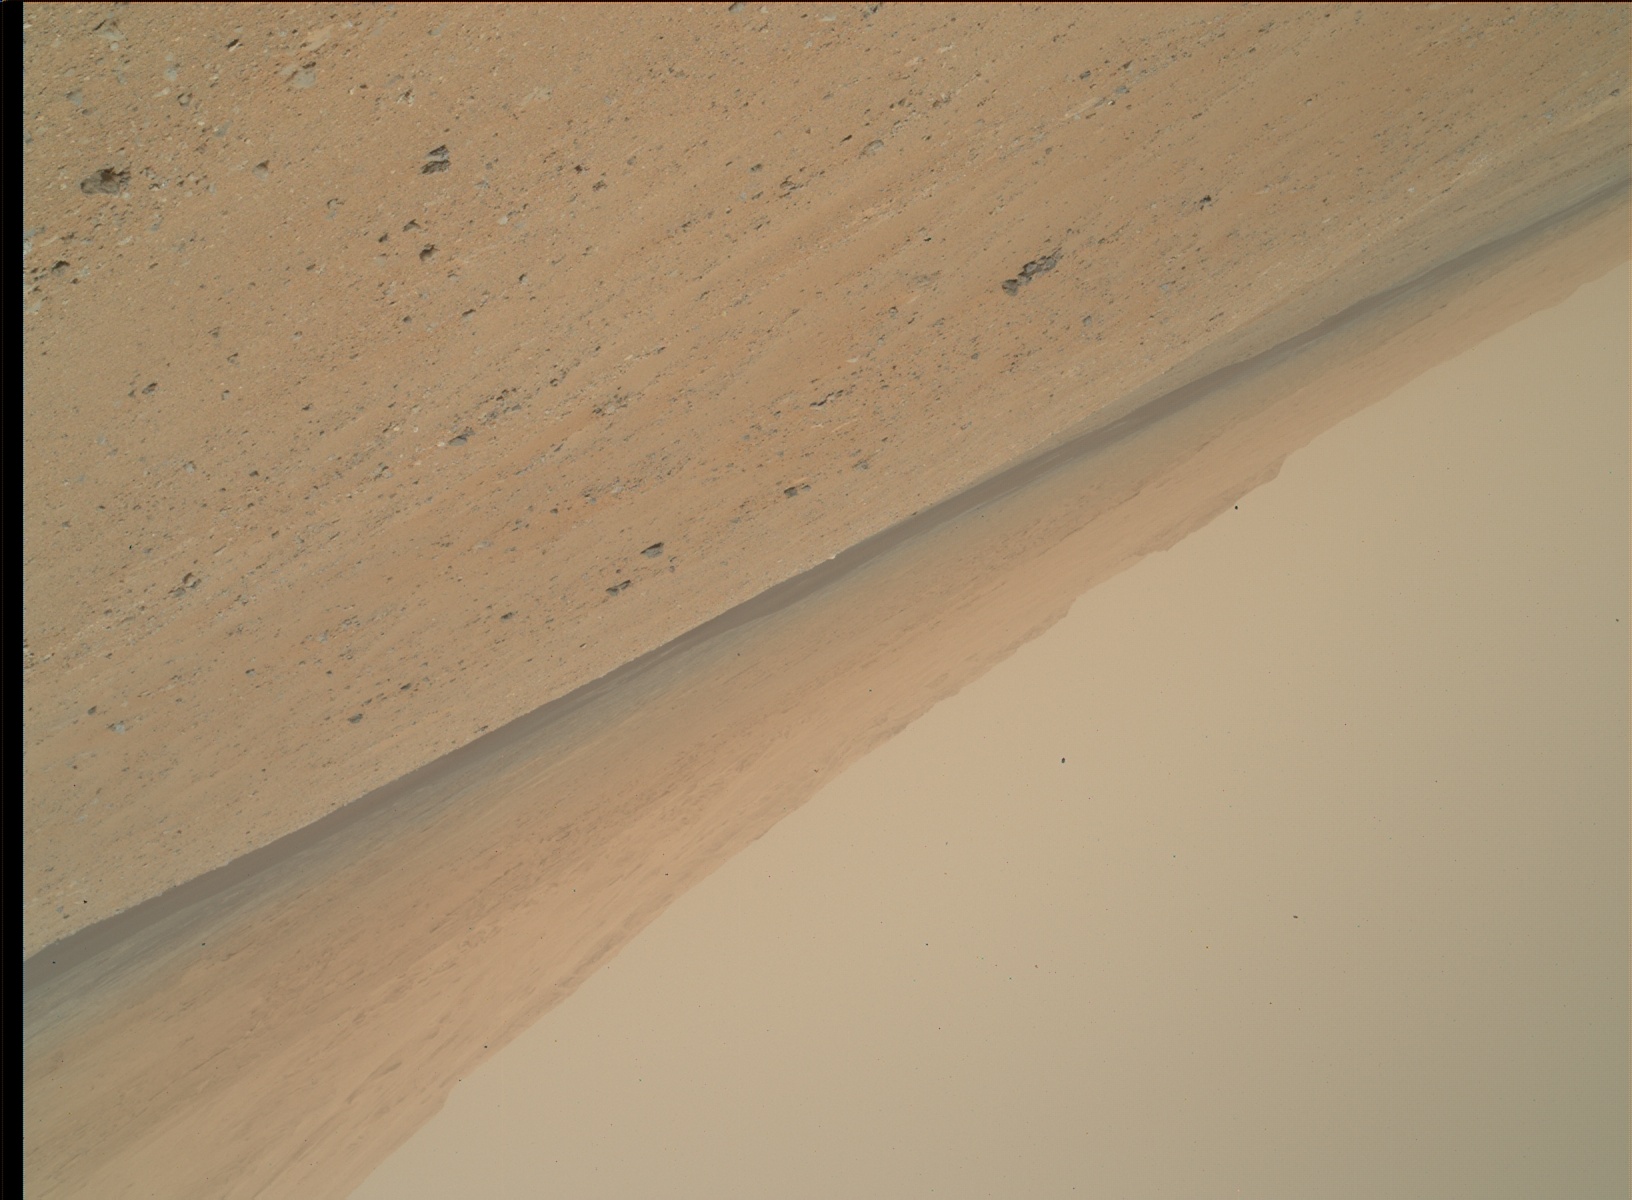 Nasa's Mars rover Curiosity acquired this image using its Mars Hand Lens Imager (MAHLI) on Sol 342